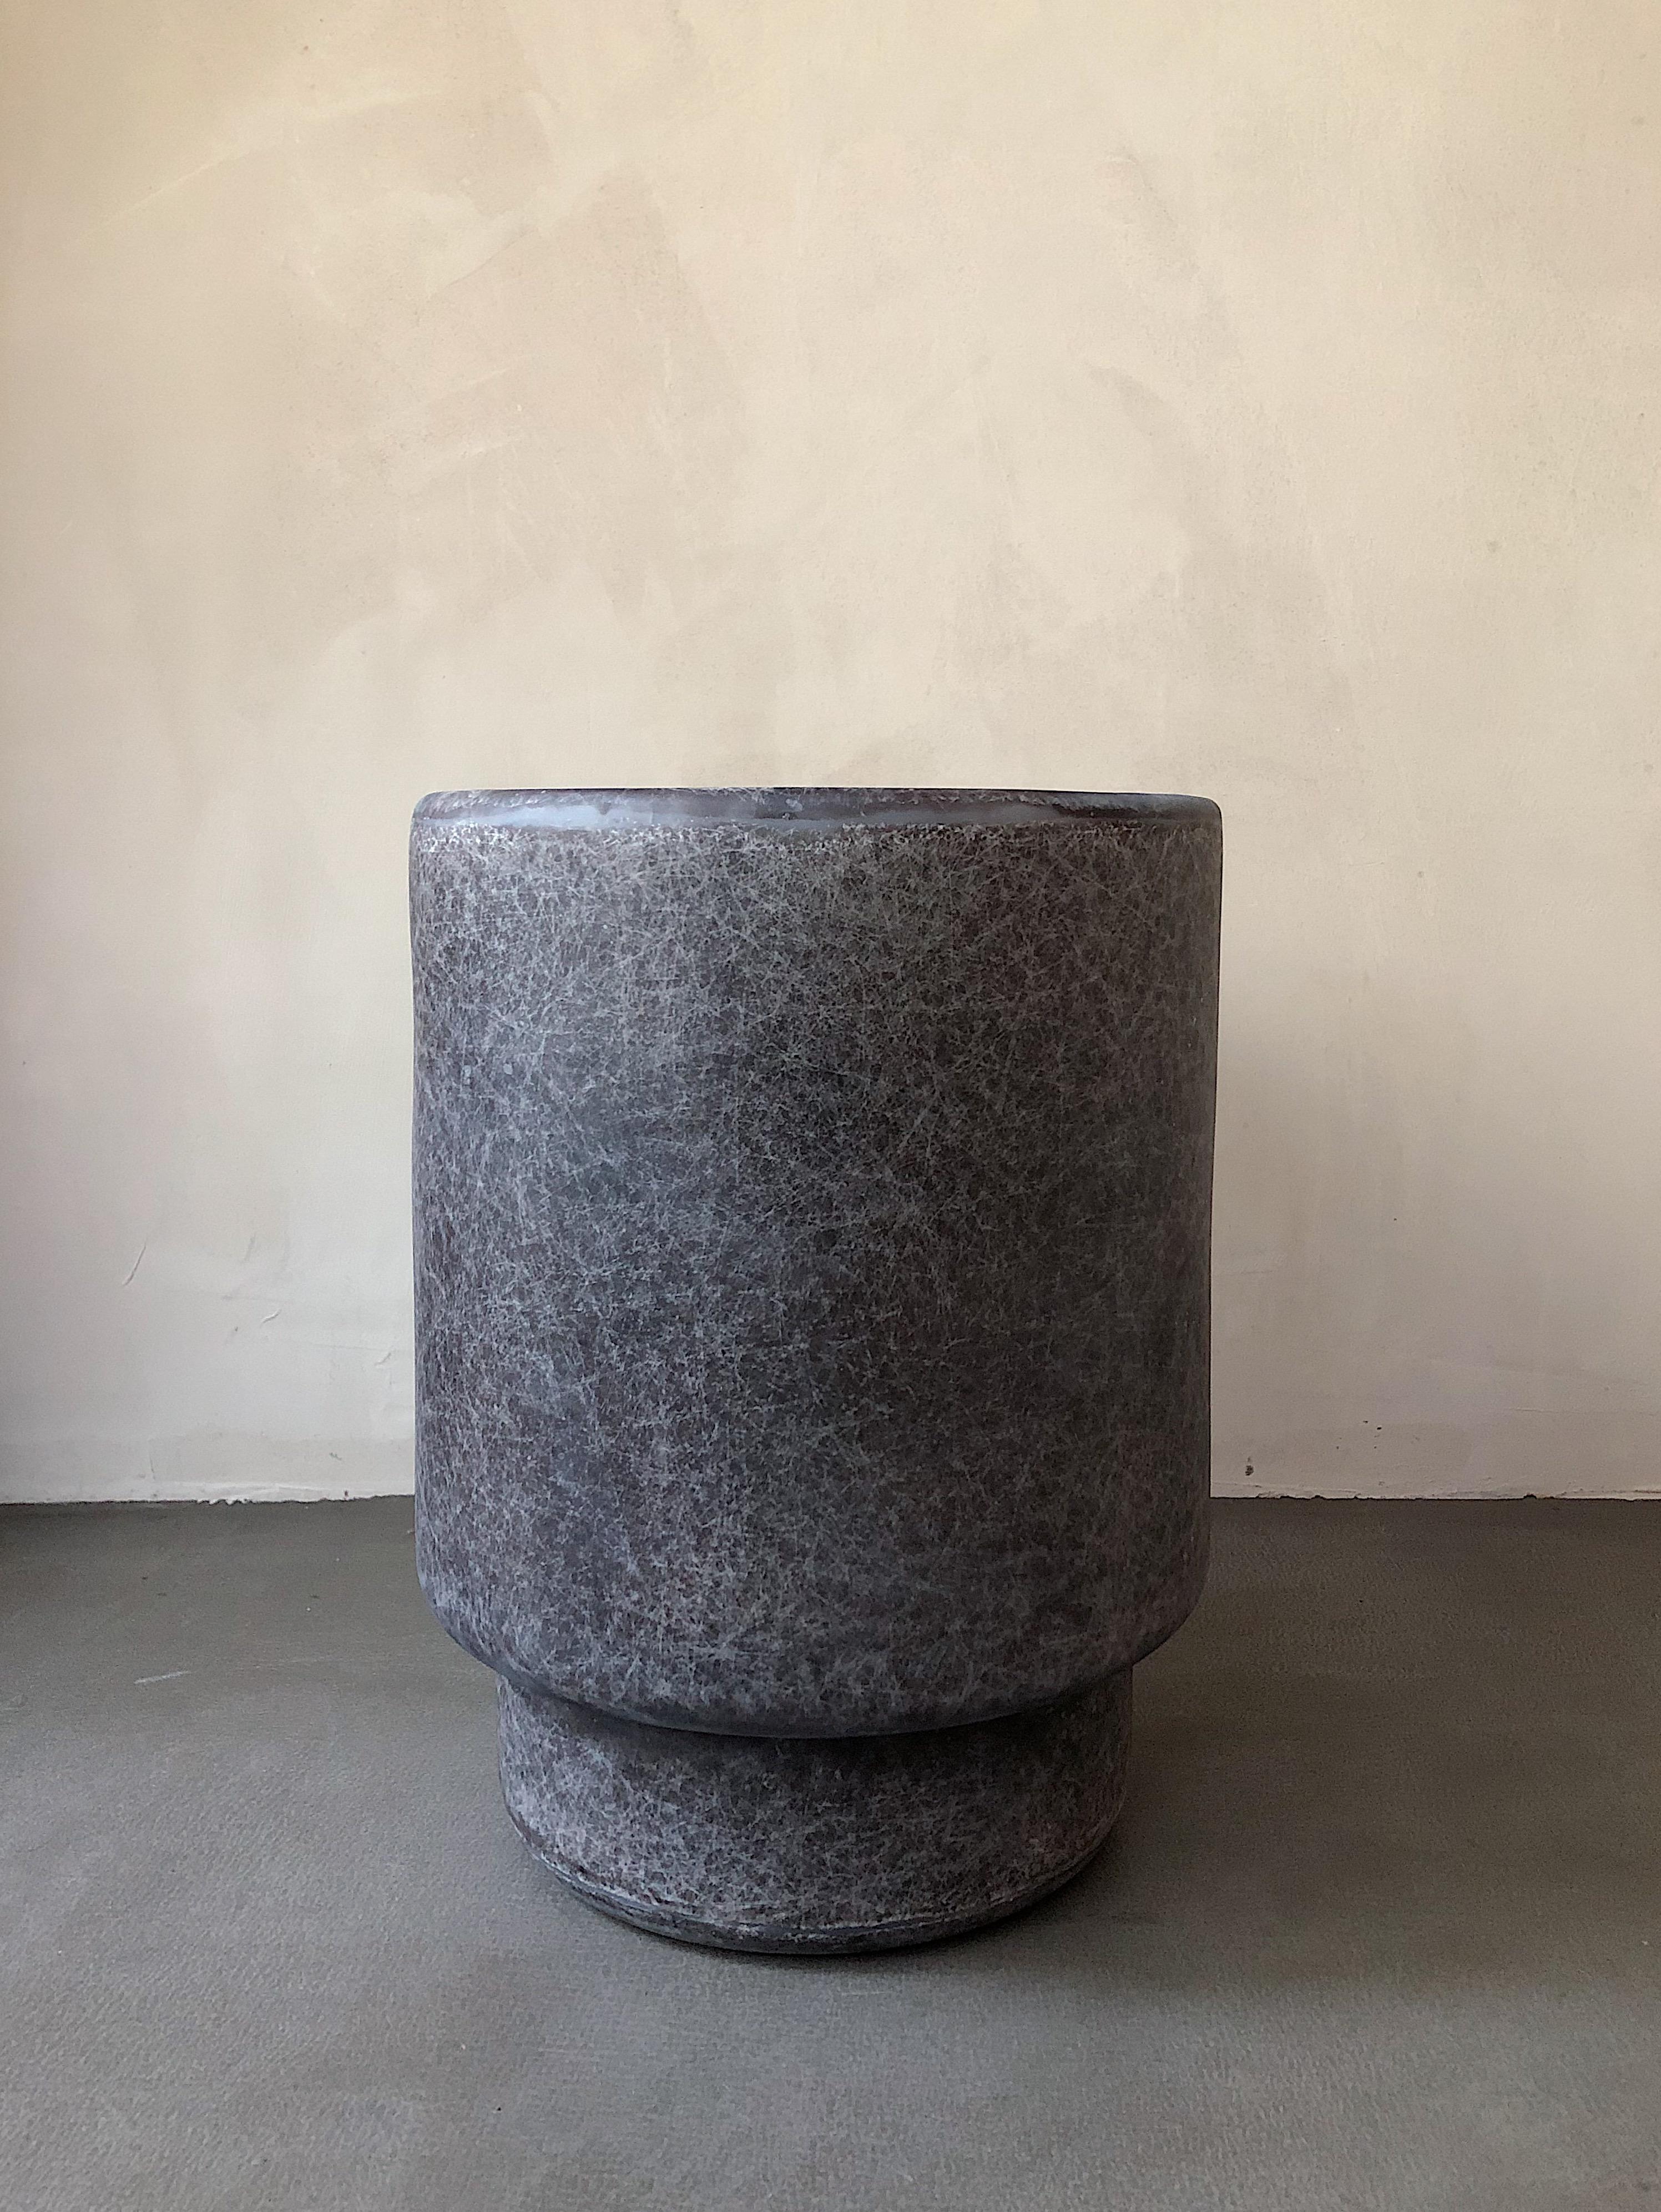 Tong coffee vase by Karstudio
Materials: FRP
Dimensions: 26 x 26 x 34 cm

A smooth shape for integrating into any space. Multiple-use as a flower vase, a container for blueprints, posters, or as it originally designed for, a trash bin.

Kar-